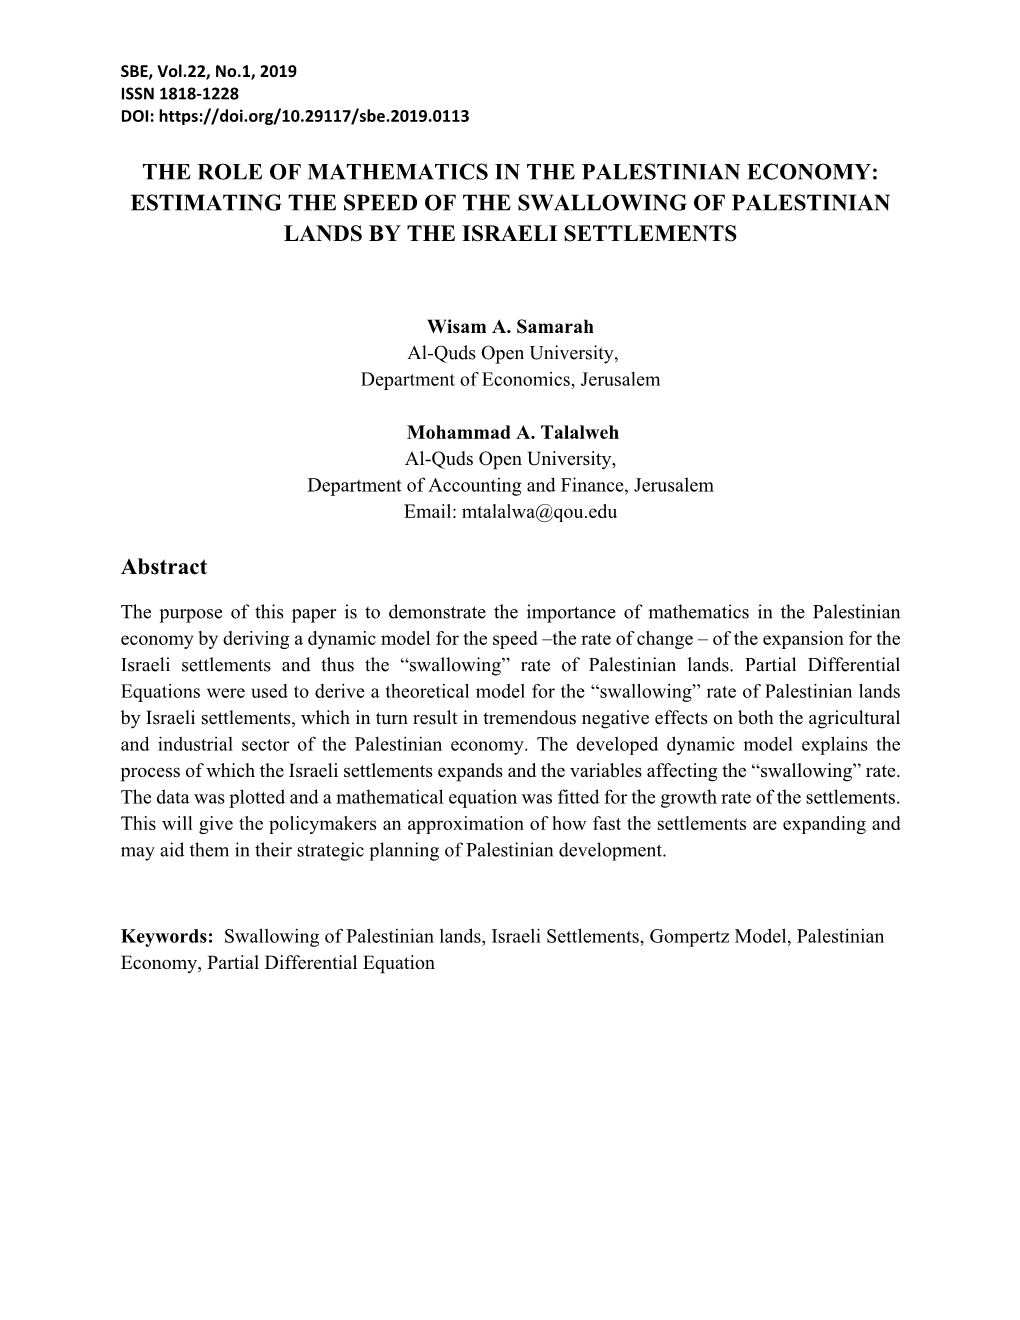 The Role of Mathematics in the Palestinian Economy: Estimating the Speed of the Swallowing of Palestinian Lands by the Israeli Settlements